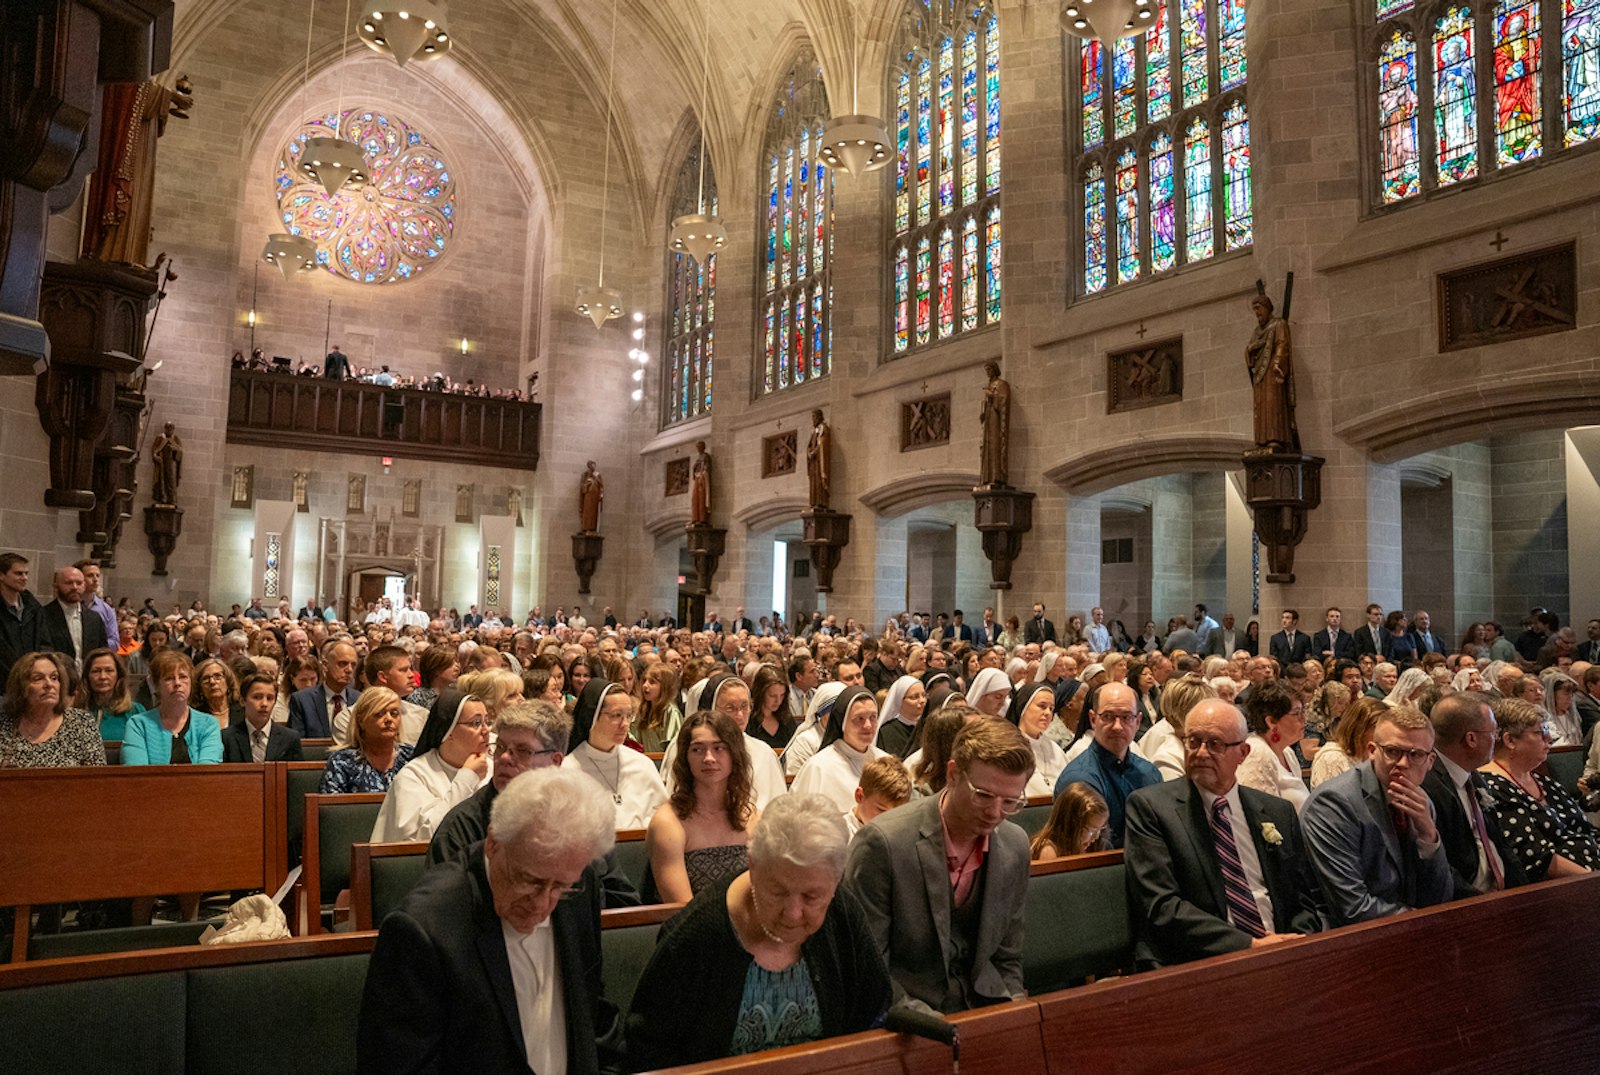 Detroit's cathedral was full as family, friends, fellow priests and faithful from across the Archdiocese of Detroit joined together to celebrate the presbyteral ordination of the five men through the invocation of the Holy Spirit on the Saturday before the feast of Pentecost.